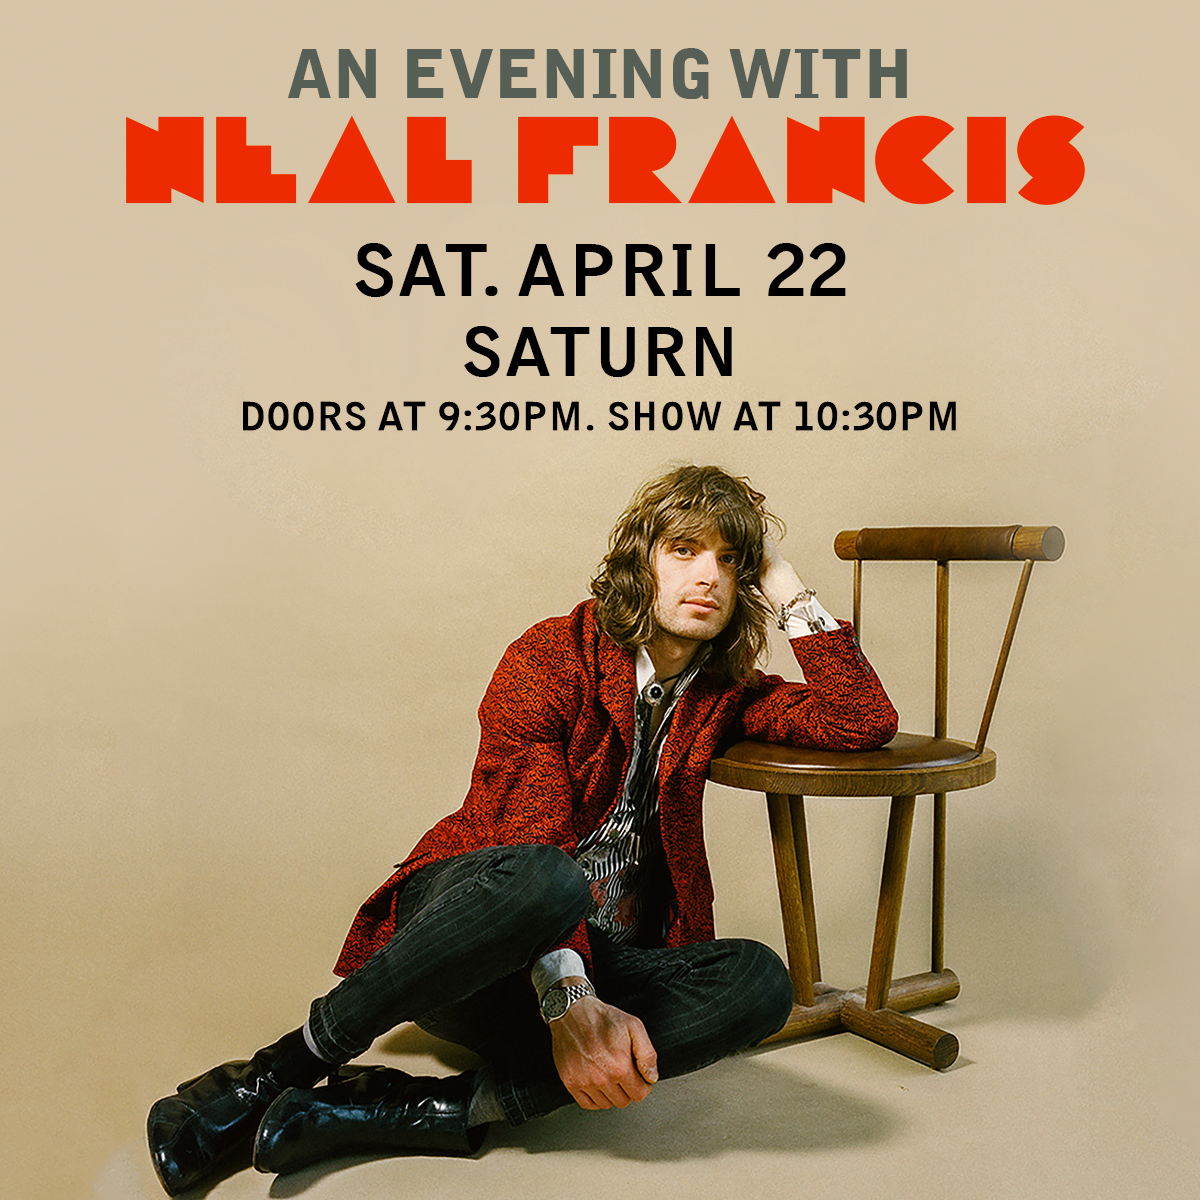 4/22! After St. Paul & The Broken Bones and Wilco, keep the party going and spend an Evening with Neal Francis live! Doors 9:30pm, Show 10:30pm. Tickets available here: bit.ly/3FbTsrS We can't wait to have @thenealfrancis back in Birmingham! See you there!